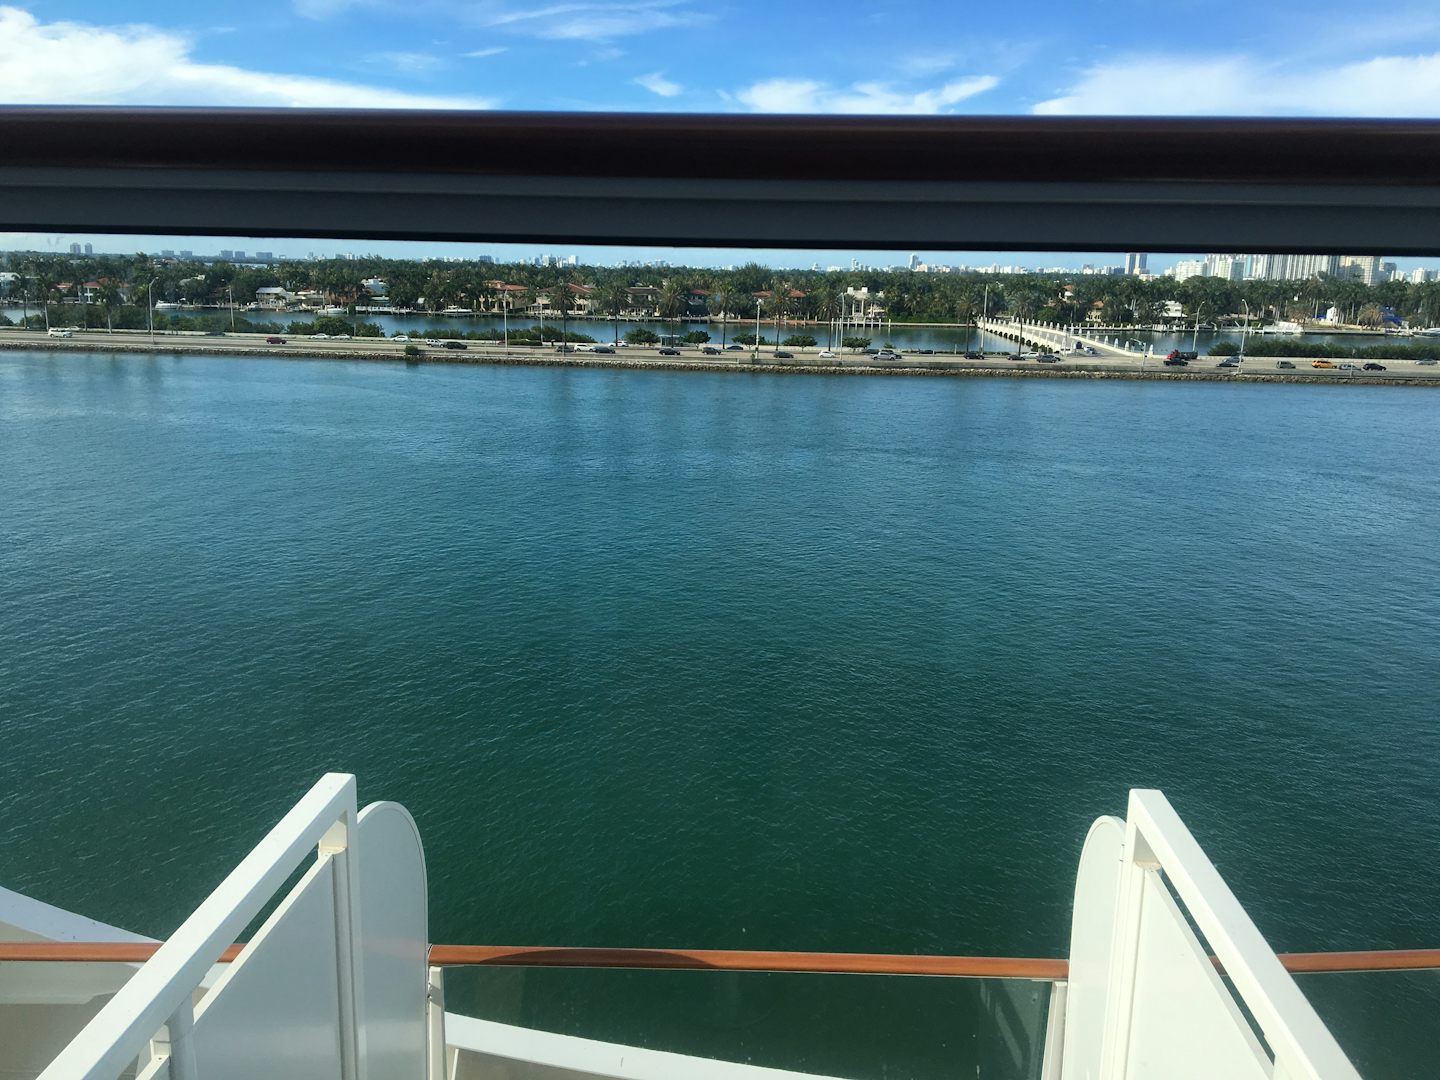 From the balcony of my stateroom while docked in Miami.